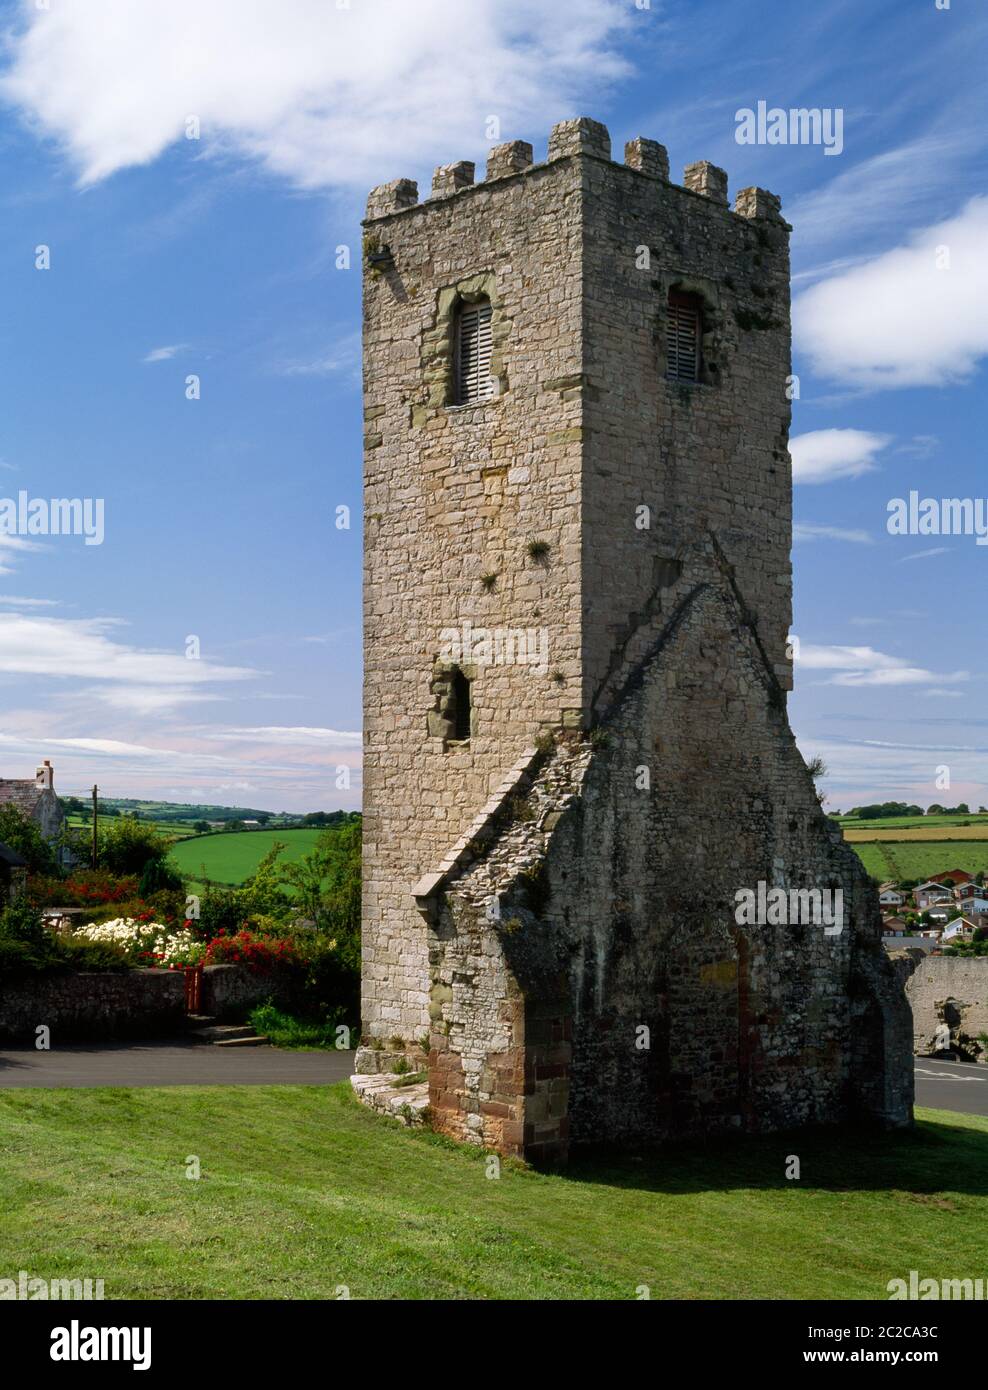 View NW of the remains of St Hilary's Chapel, Denbigh, Wales, UK, built around 1300 as a chapel to serve the new walled town: the castle's town ward. Stock Photo